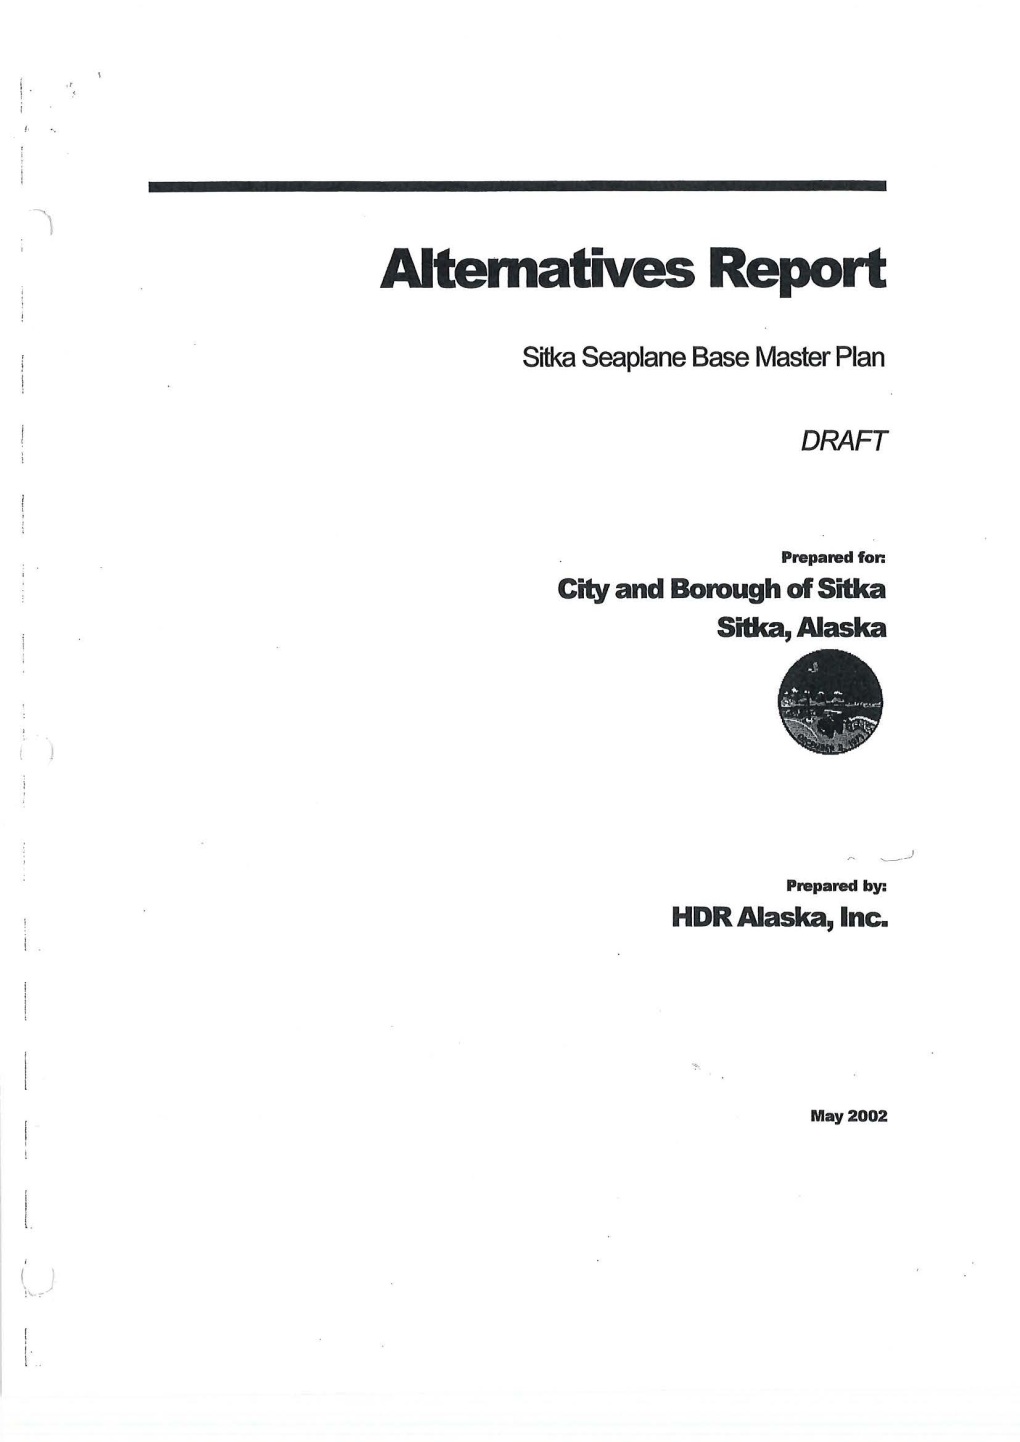 Altematives Report